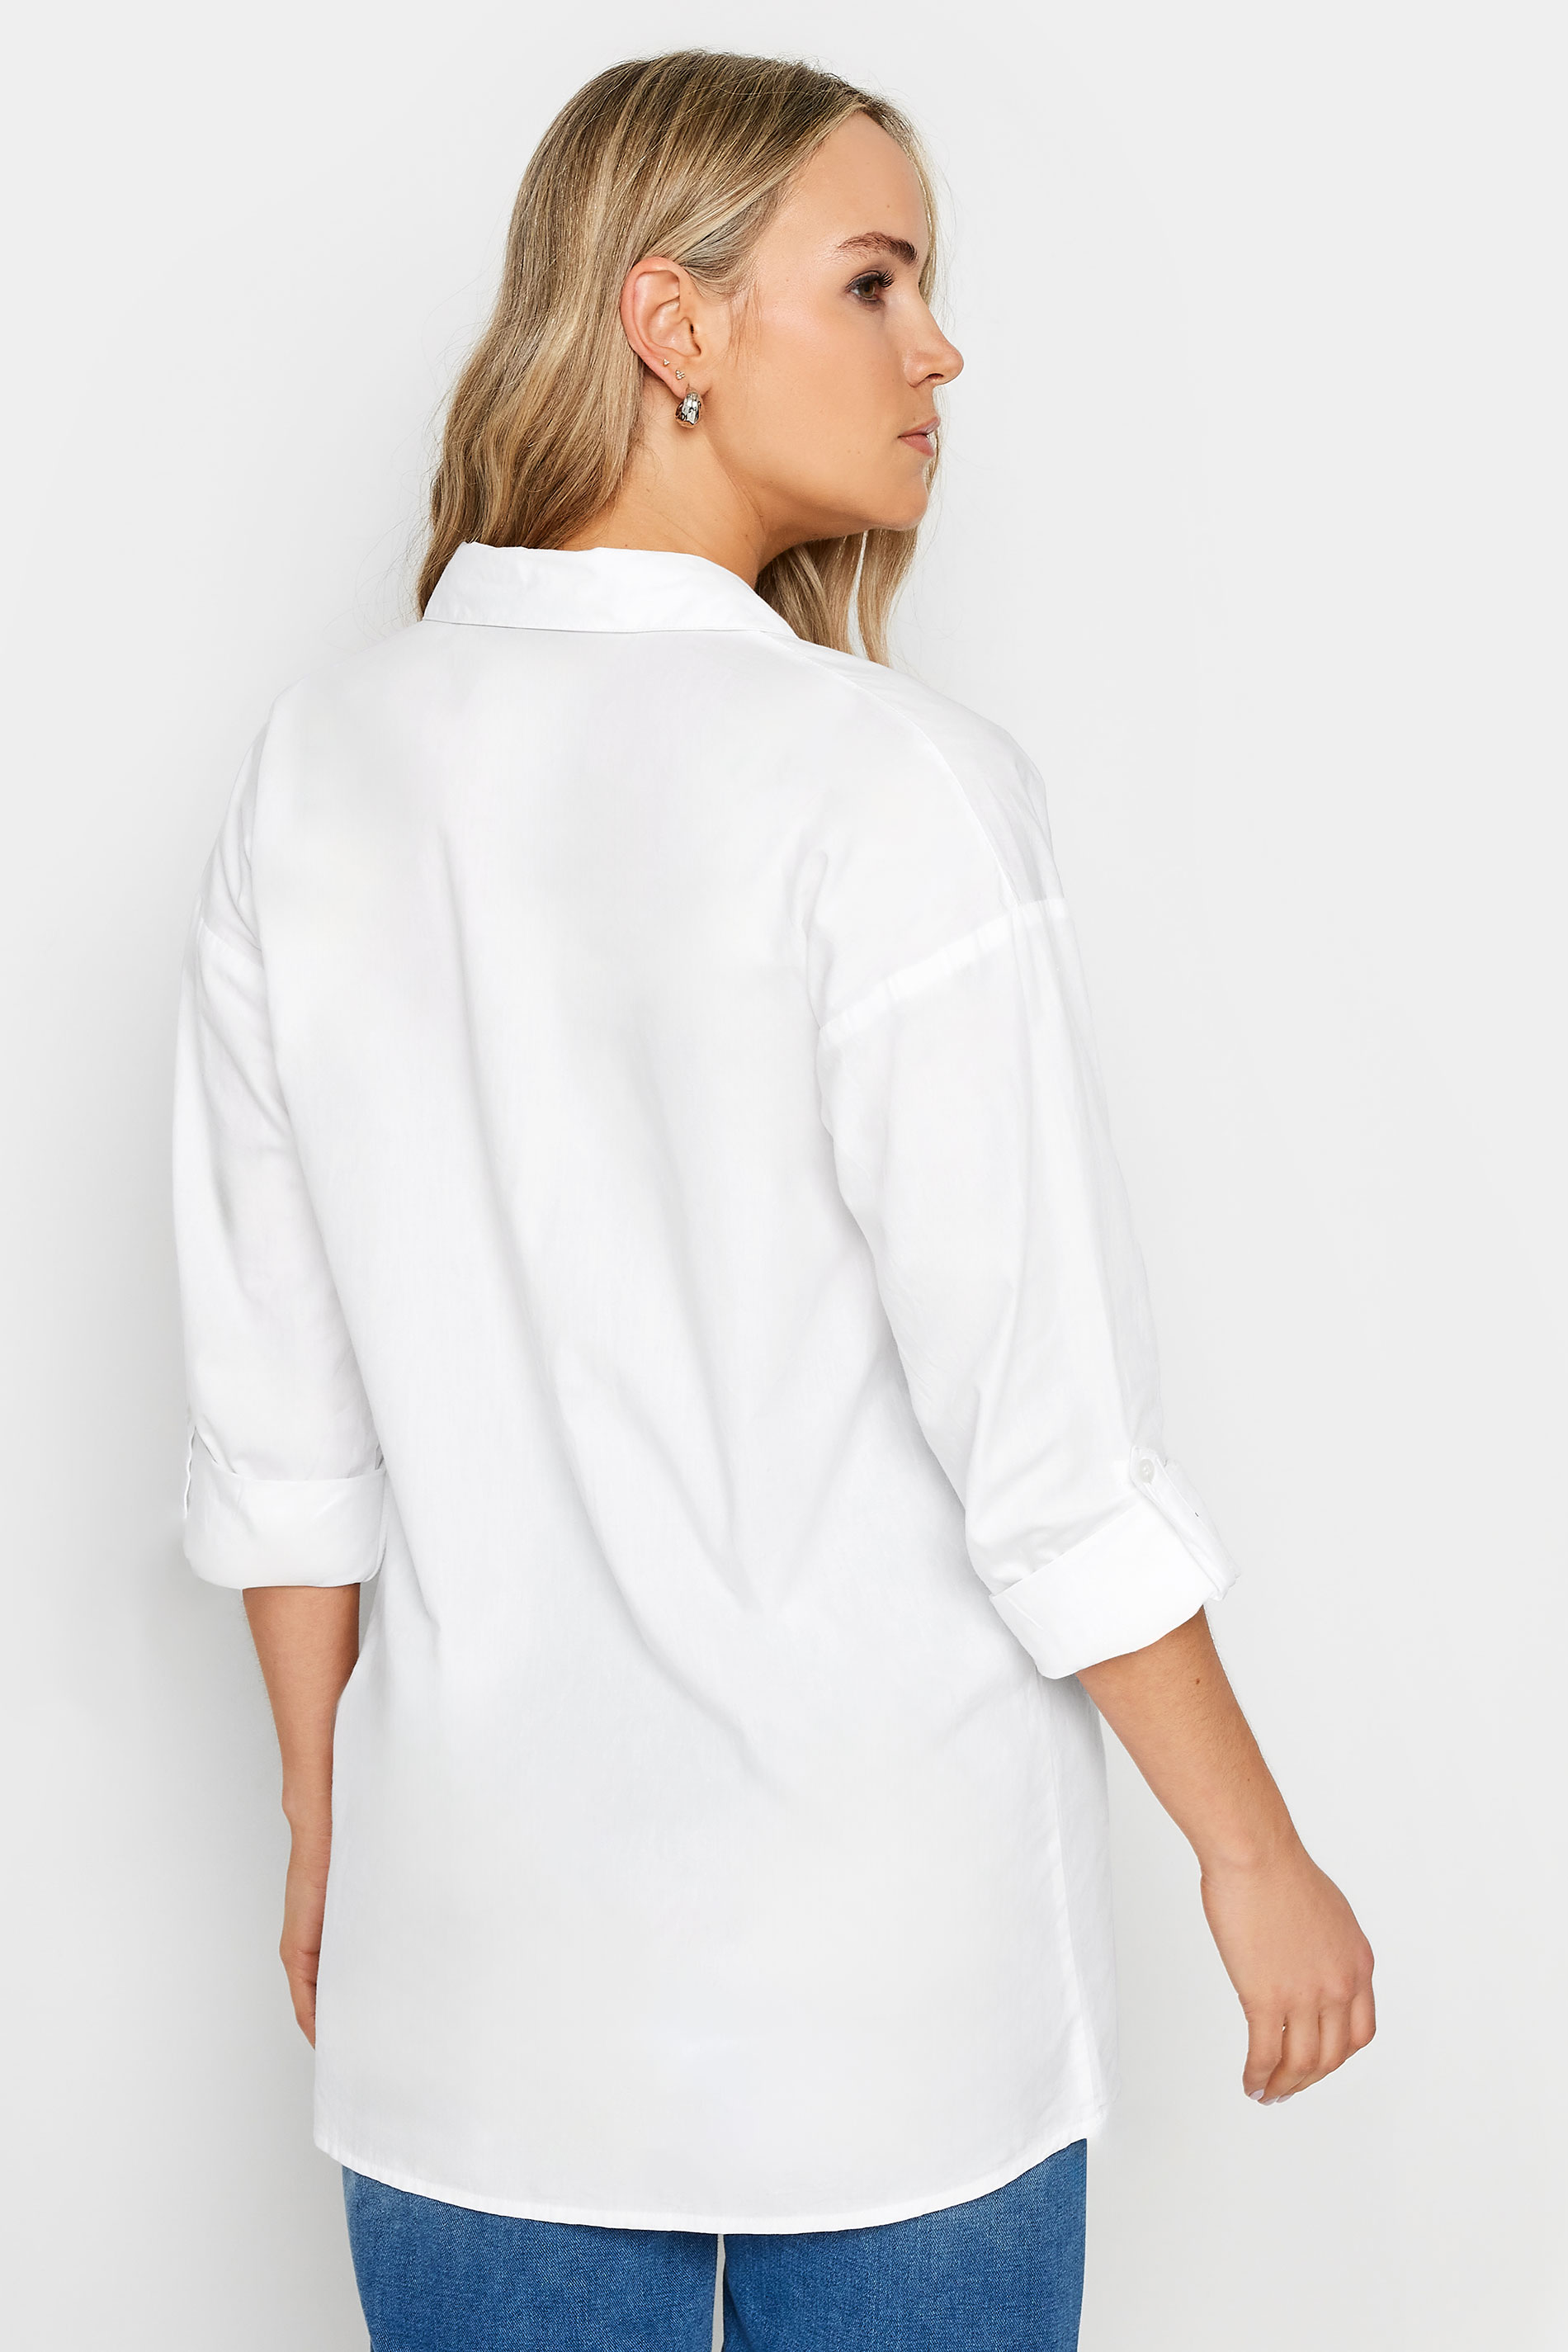 LTS MADE FOR GOOD Tall White Cotton Oversized Shirt | Long Tall Sally 3